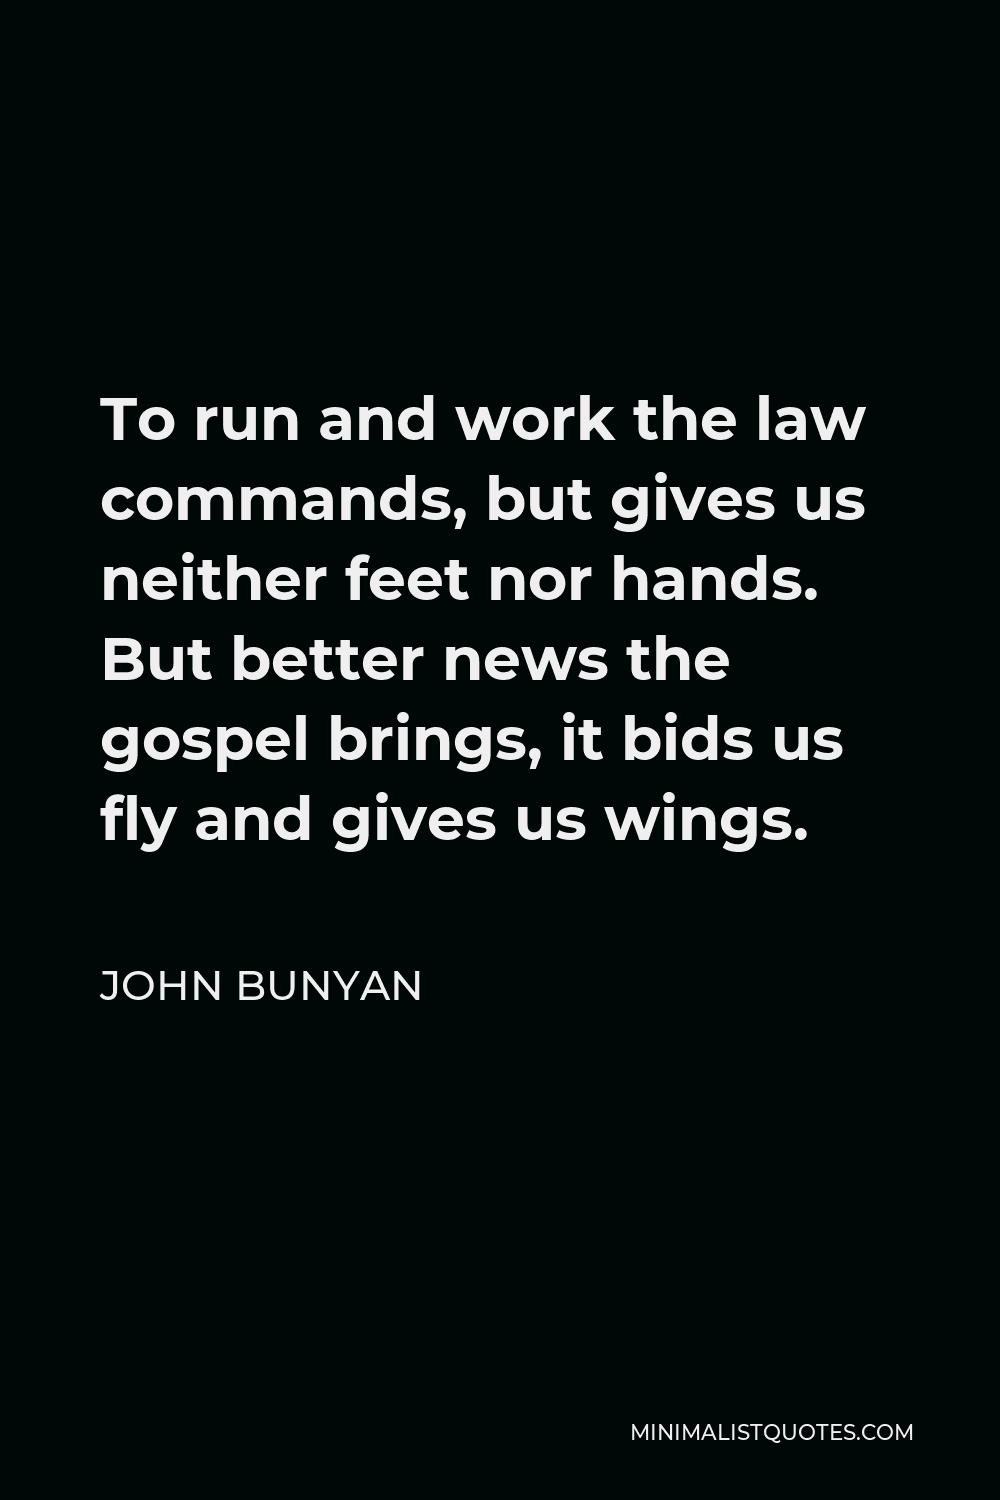 John Bunyan Quote - To run and work the law commands, but gives us neither feet nor hands. But better news the gospel brings, it bids us fly and gives us wings.